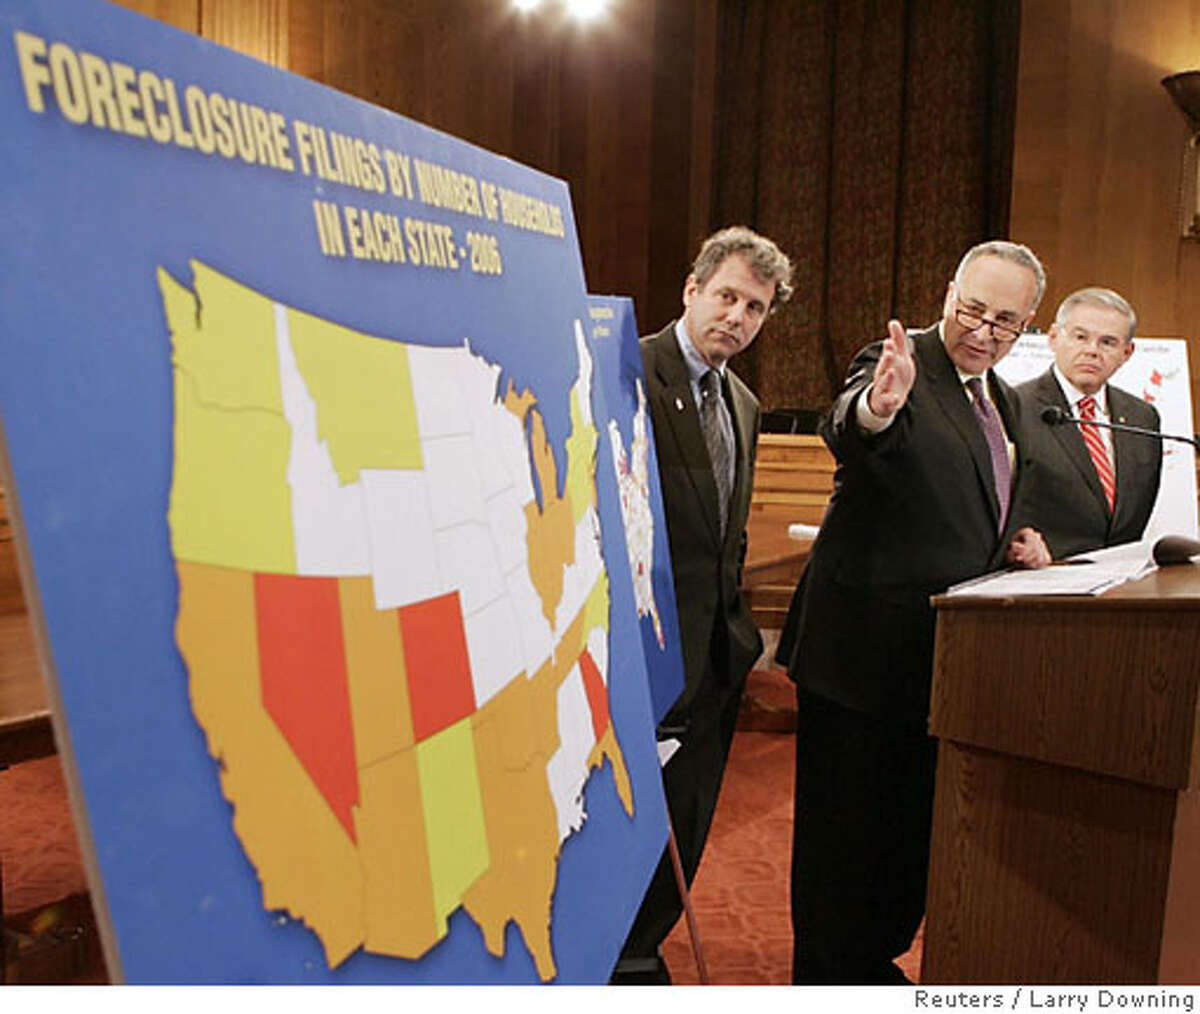 U.S. Senators' Charles Schumer (D-NY-C), Sherrod Brown (D-Oh-L), and Bob Menendez (D-NJ), present a Congressional Joint Economic Committee report revealing the impact of subprime mortgages and their fallout across America, while on Capitol Hill in Washington, April 11, 2007. REUTERS/Larry Downing (UNITED STATES) Ran on: 04-22-2007 Sens. Charles Schumer, D-N.Y., Sherrod Brown, D-Ohio, and Bob Menendez, D-N.J., present a report on subprime mortgages this month.